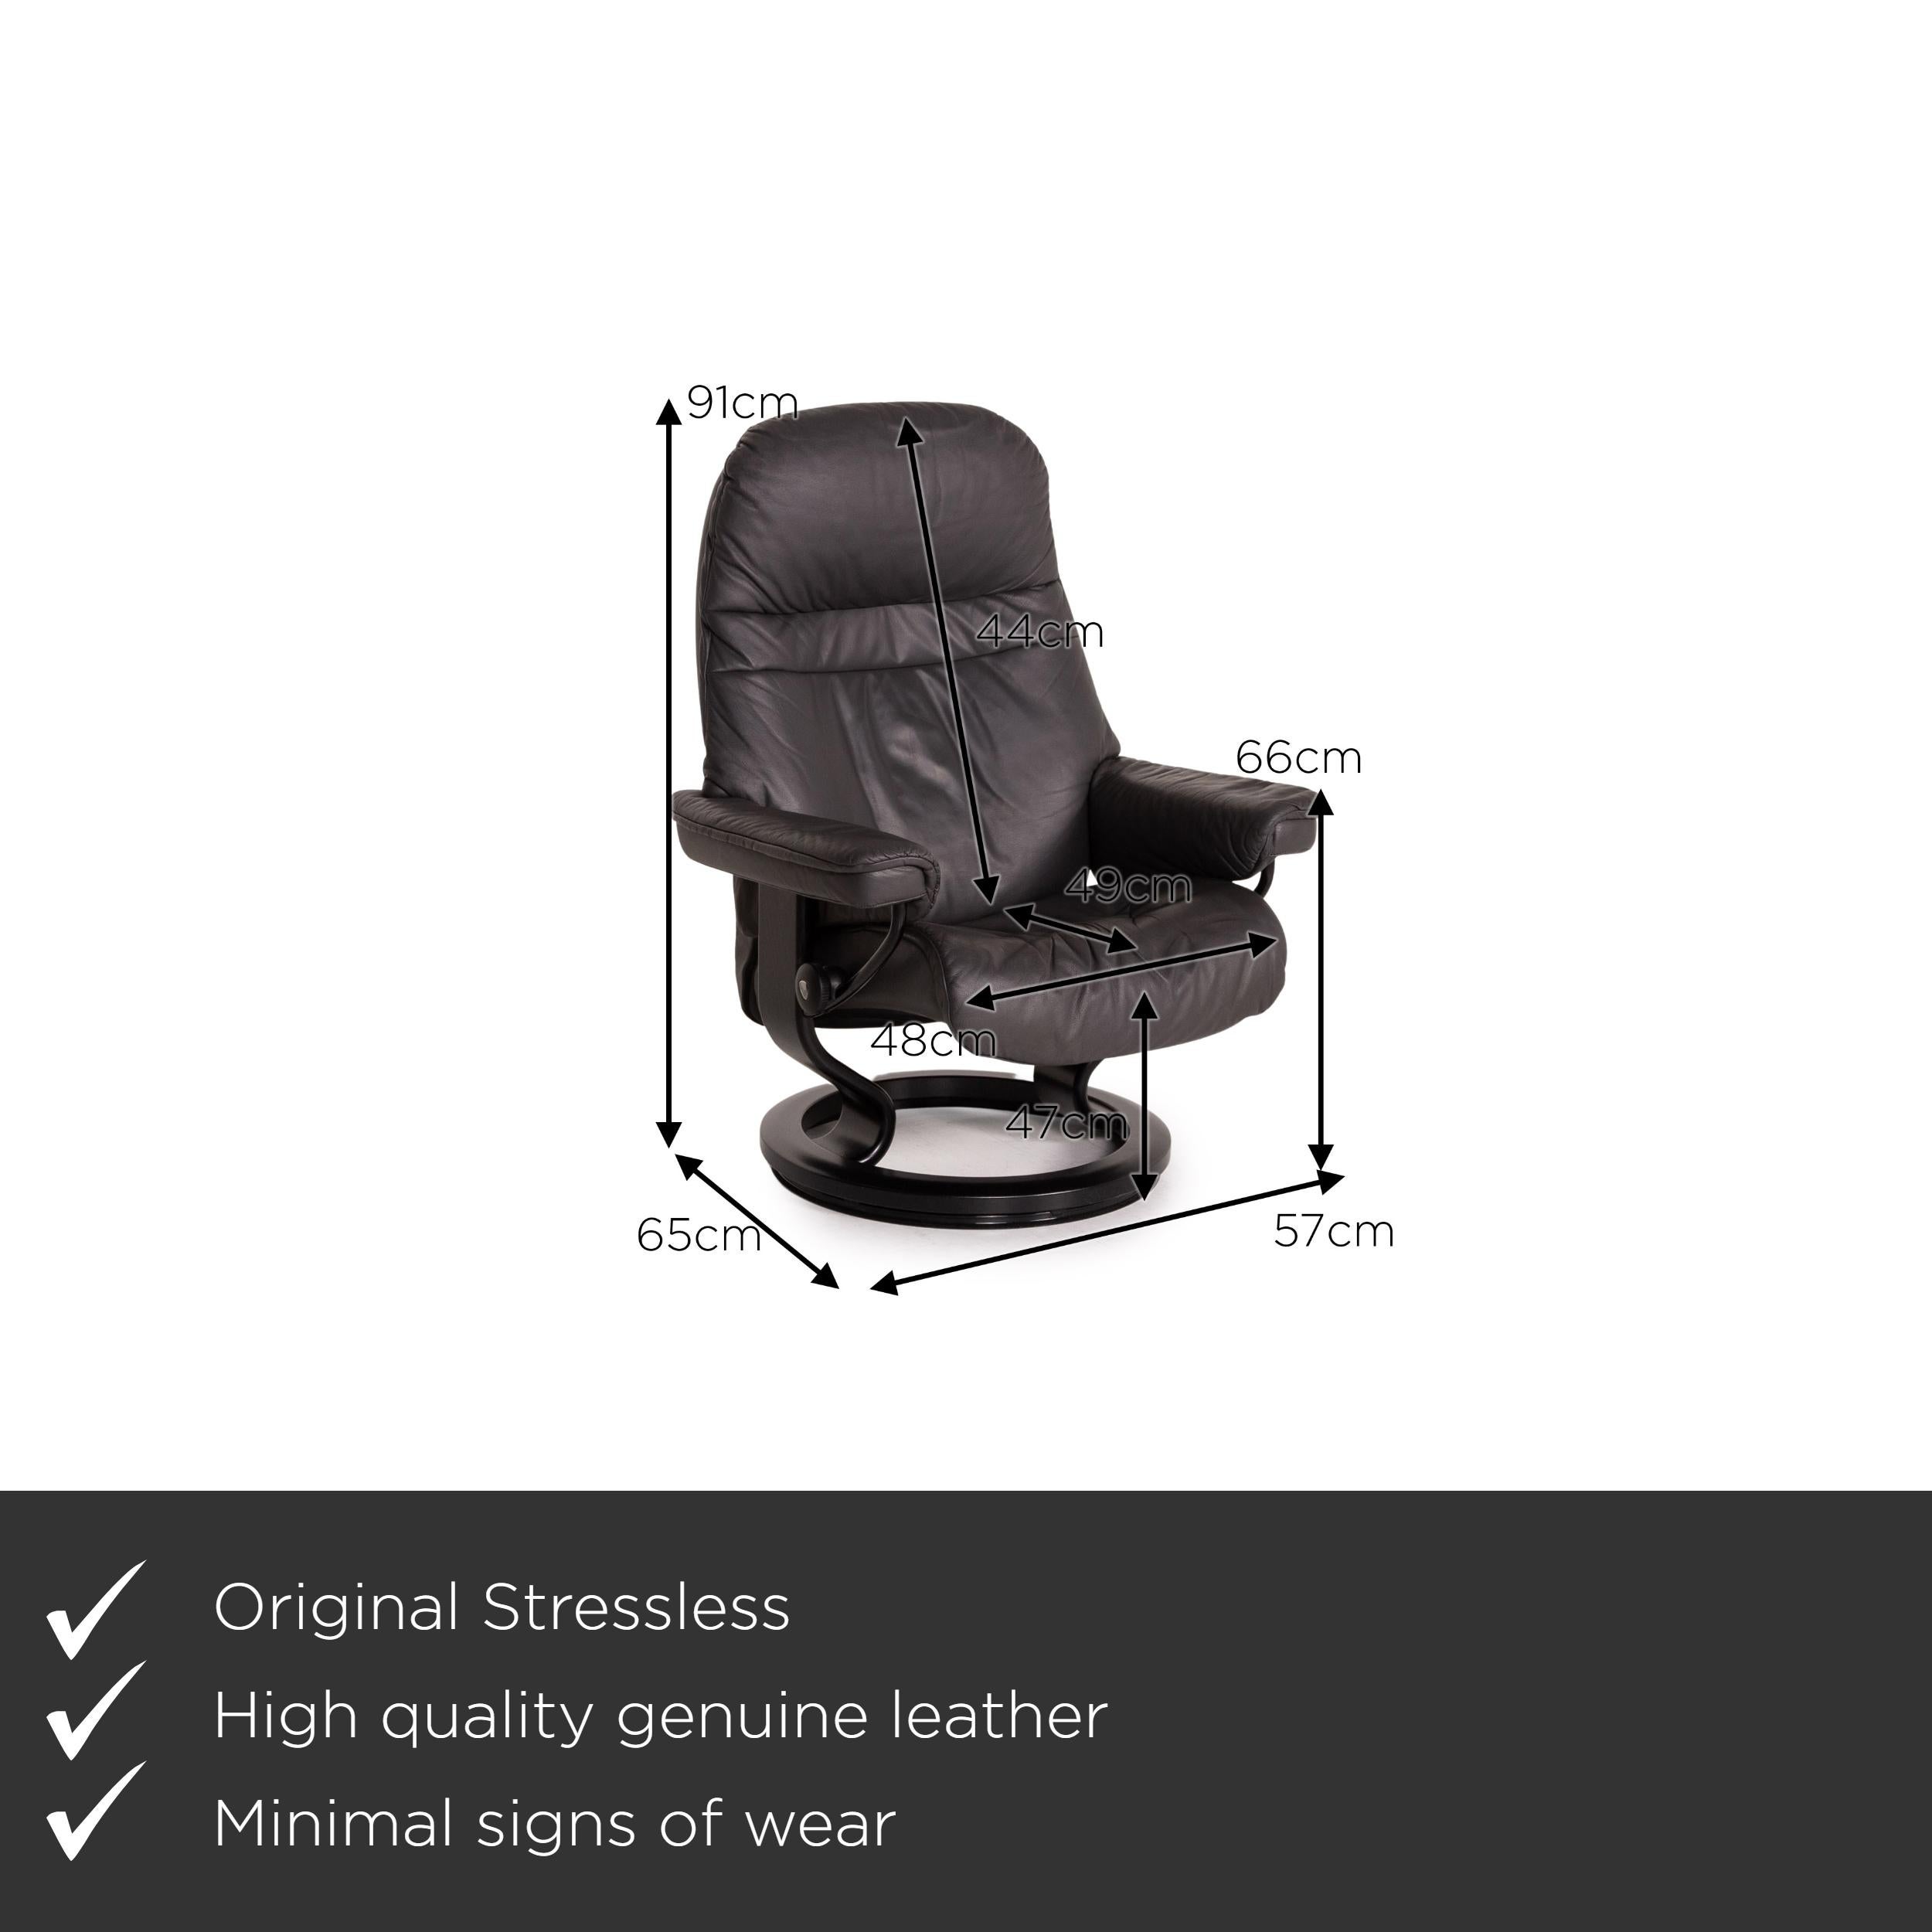 We present to you a Stressless Sunrise leather armchair incl. Ottoman gray size M Relax function.
  
 

 Product measurements in centimeters:
 

 depth: 86
 width: 78
 height: 98
 seat height: 44
 rest height: 52
 seat depth: 47
 seat